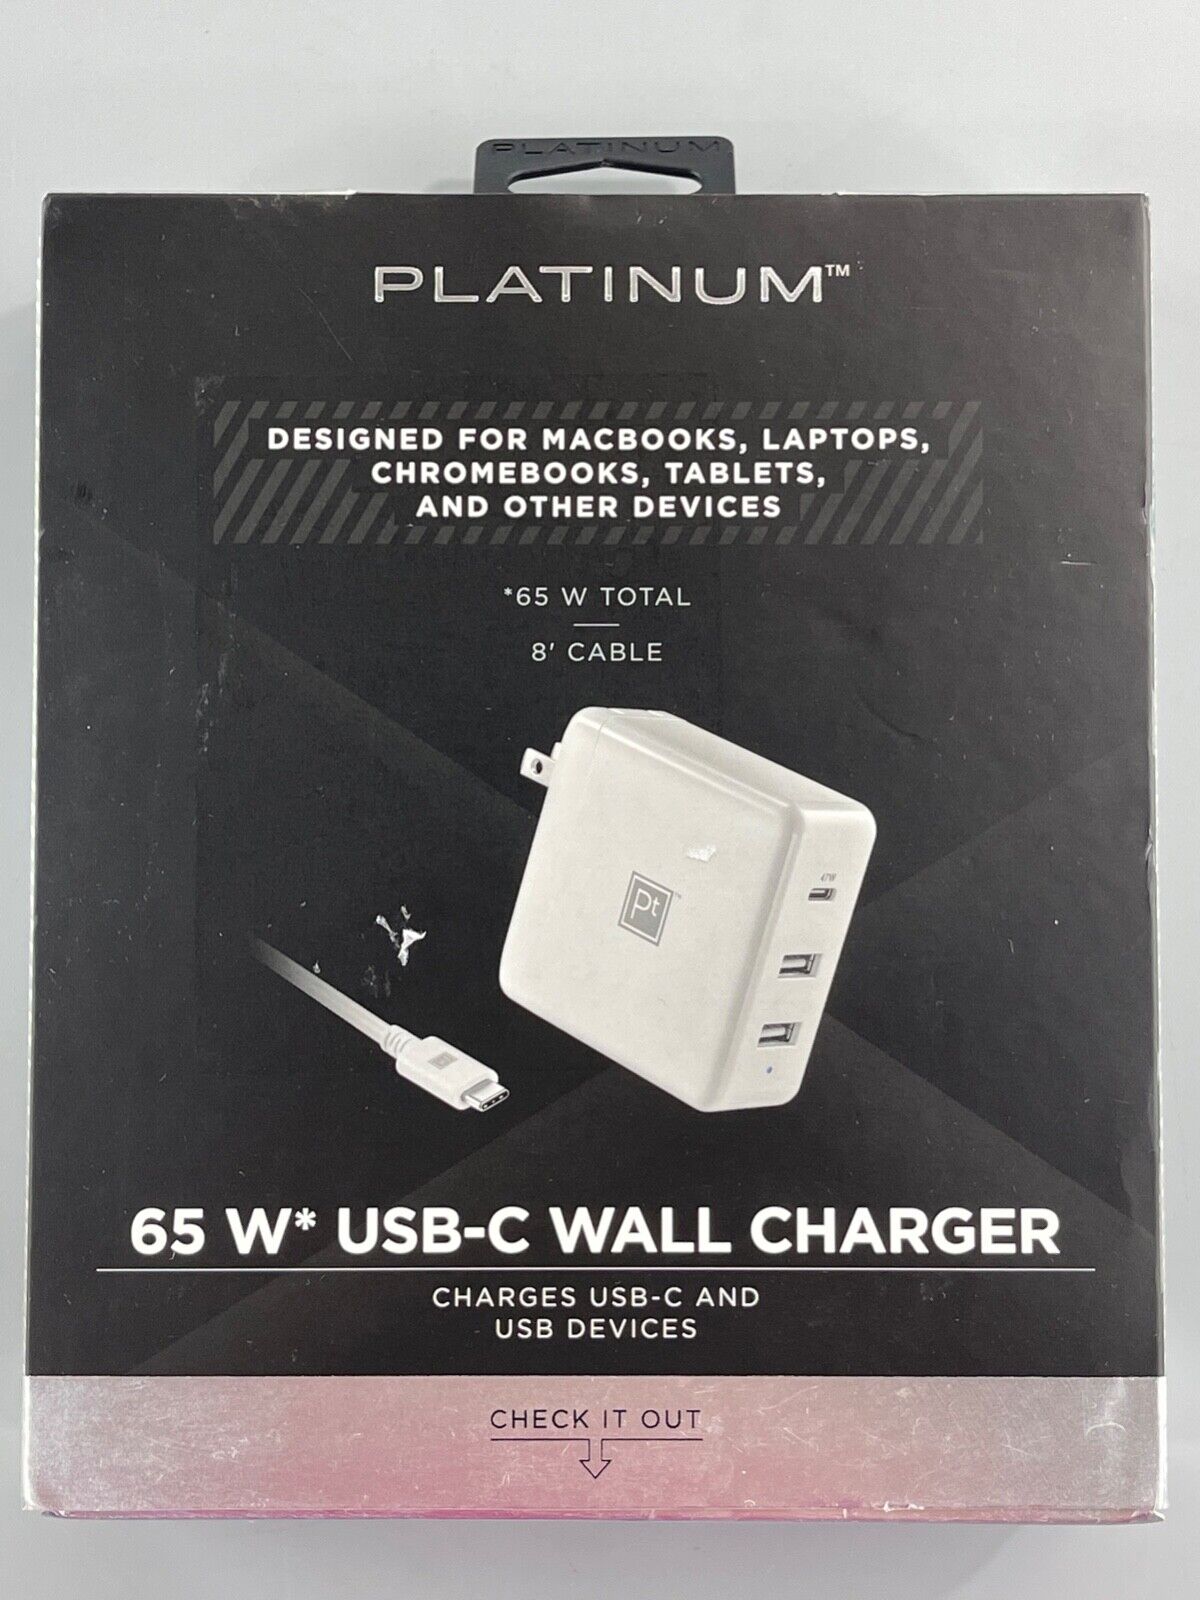 Platinum 65W USB-C Wall Charger with USB-C Cable and 2 USB Ports (PT-PAC65C2U-C)